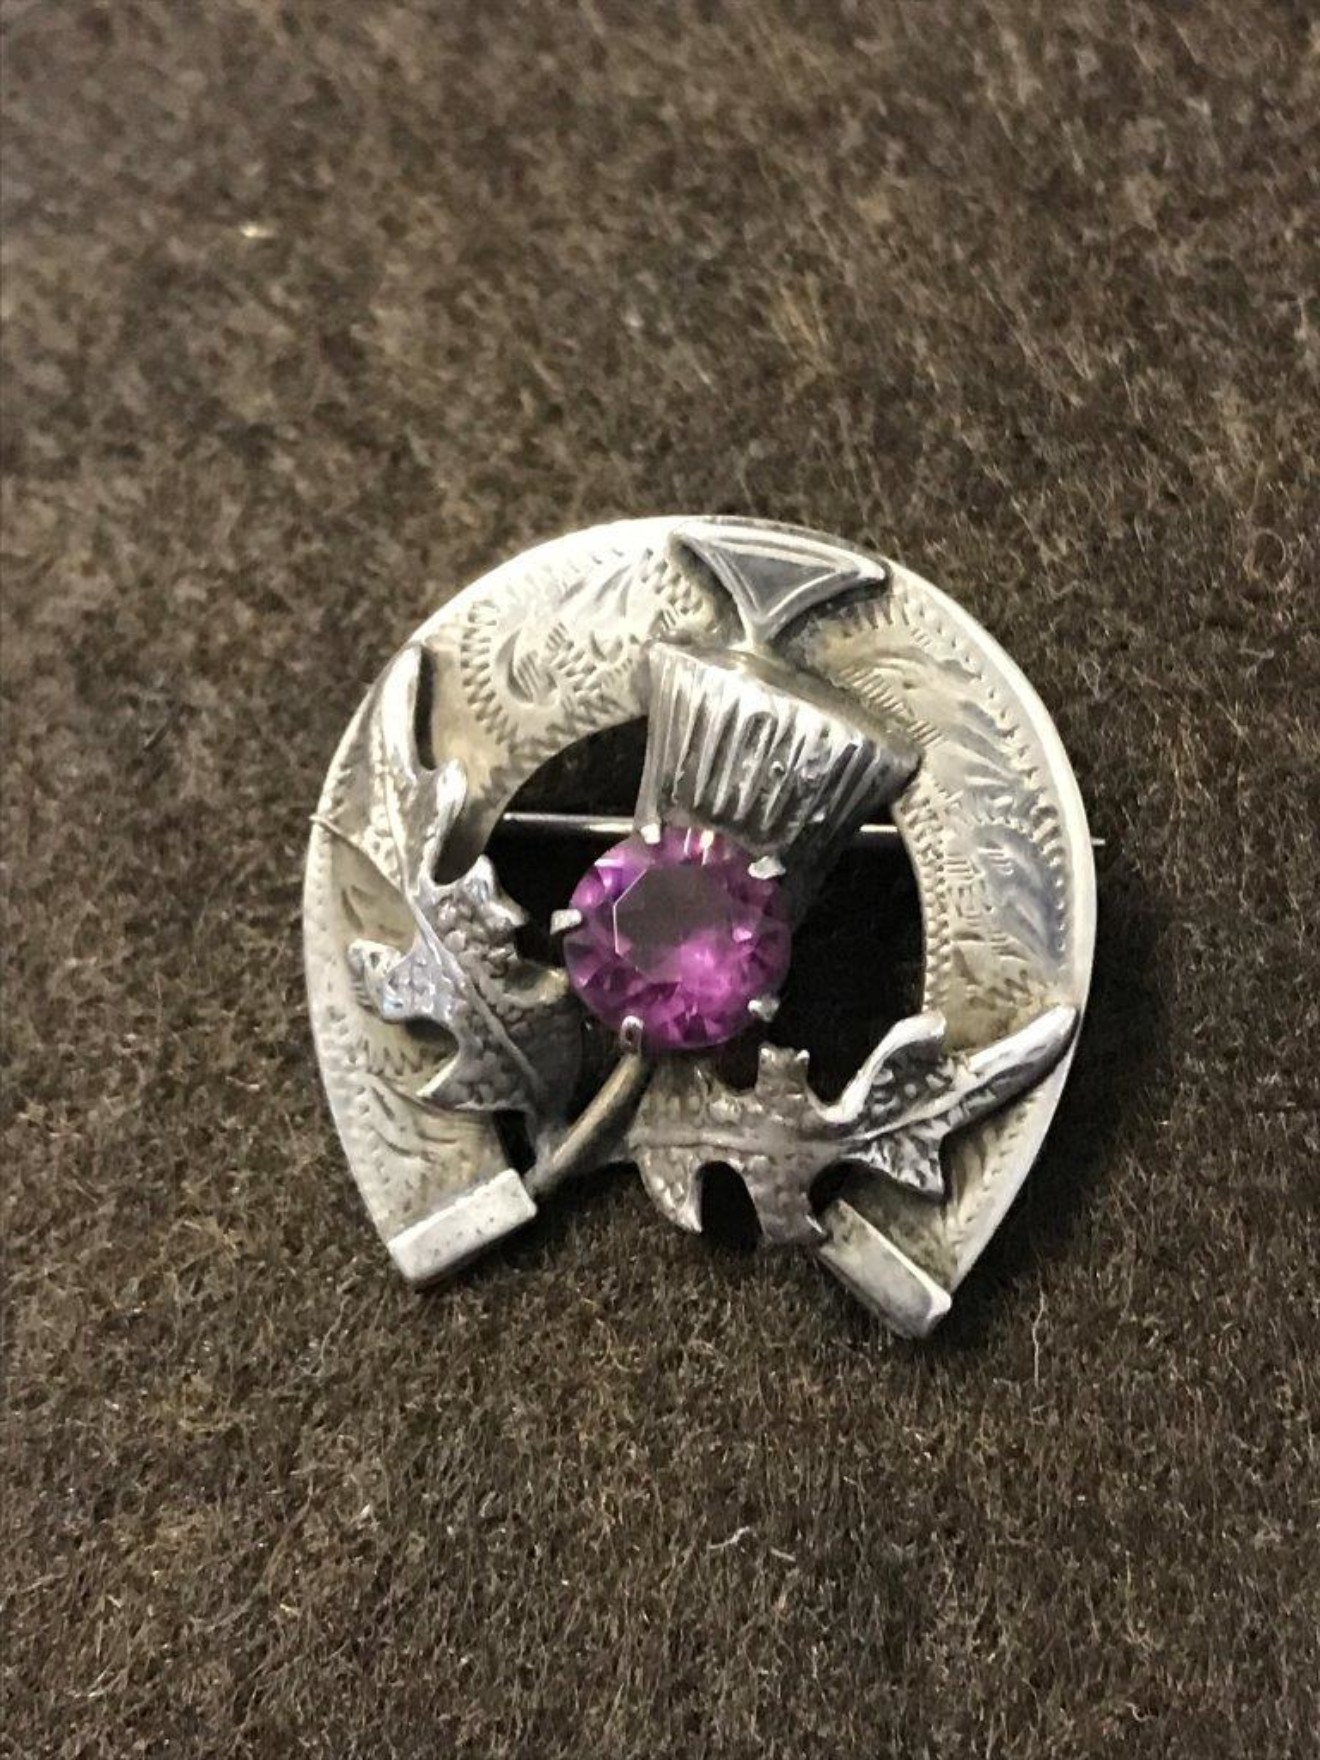 Vintage Scottish Silver Lucky Horseshoe Thistle Brooch with Amethyst Coloured Stone